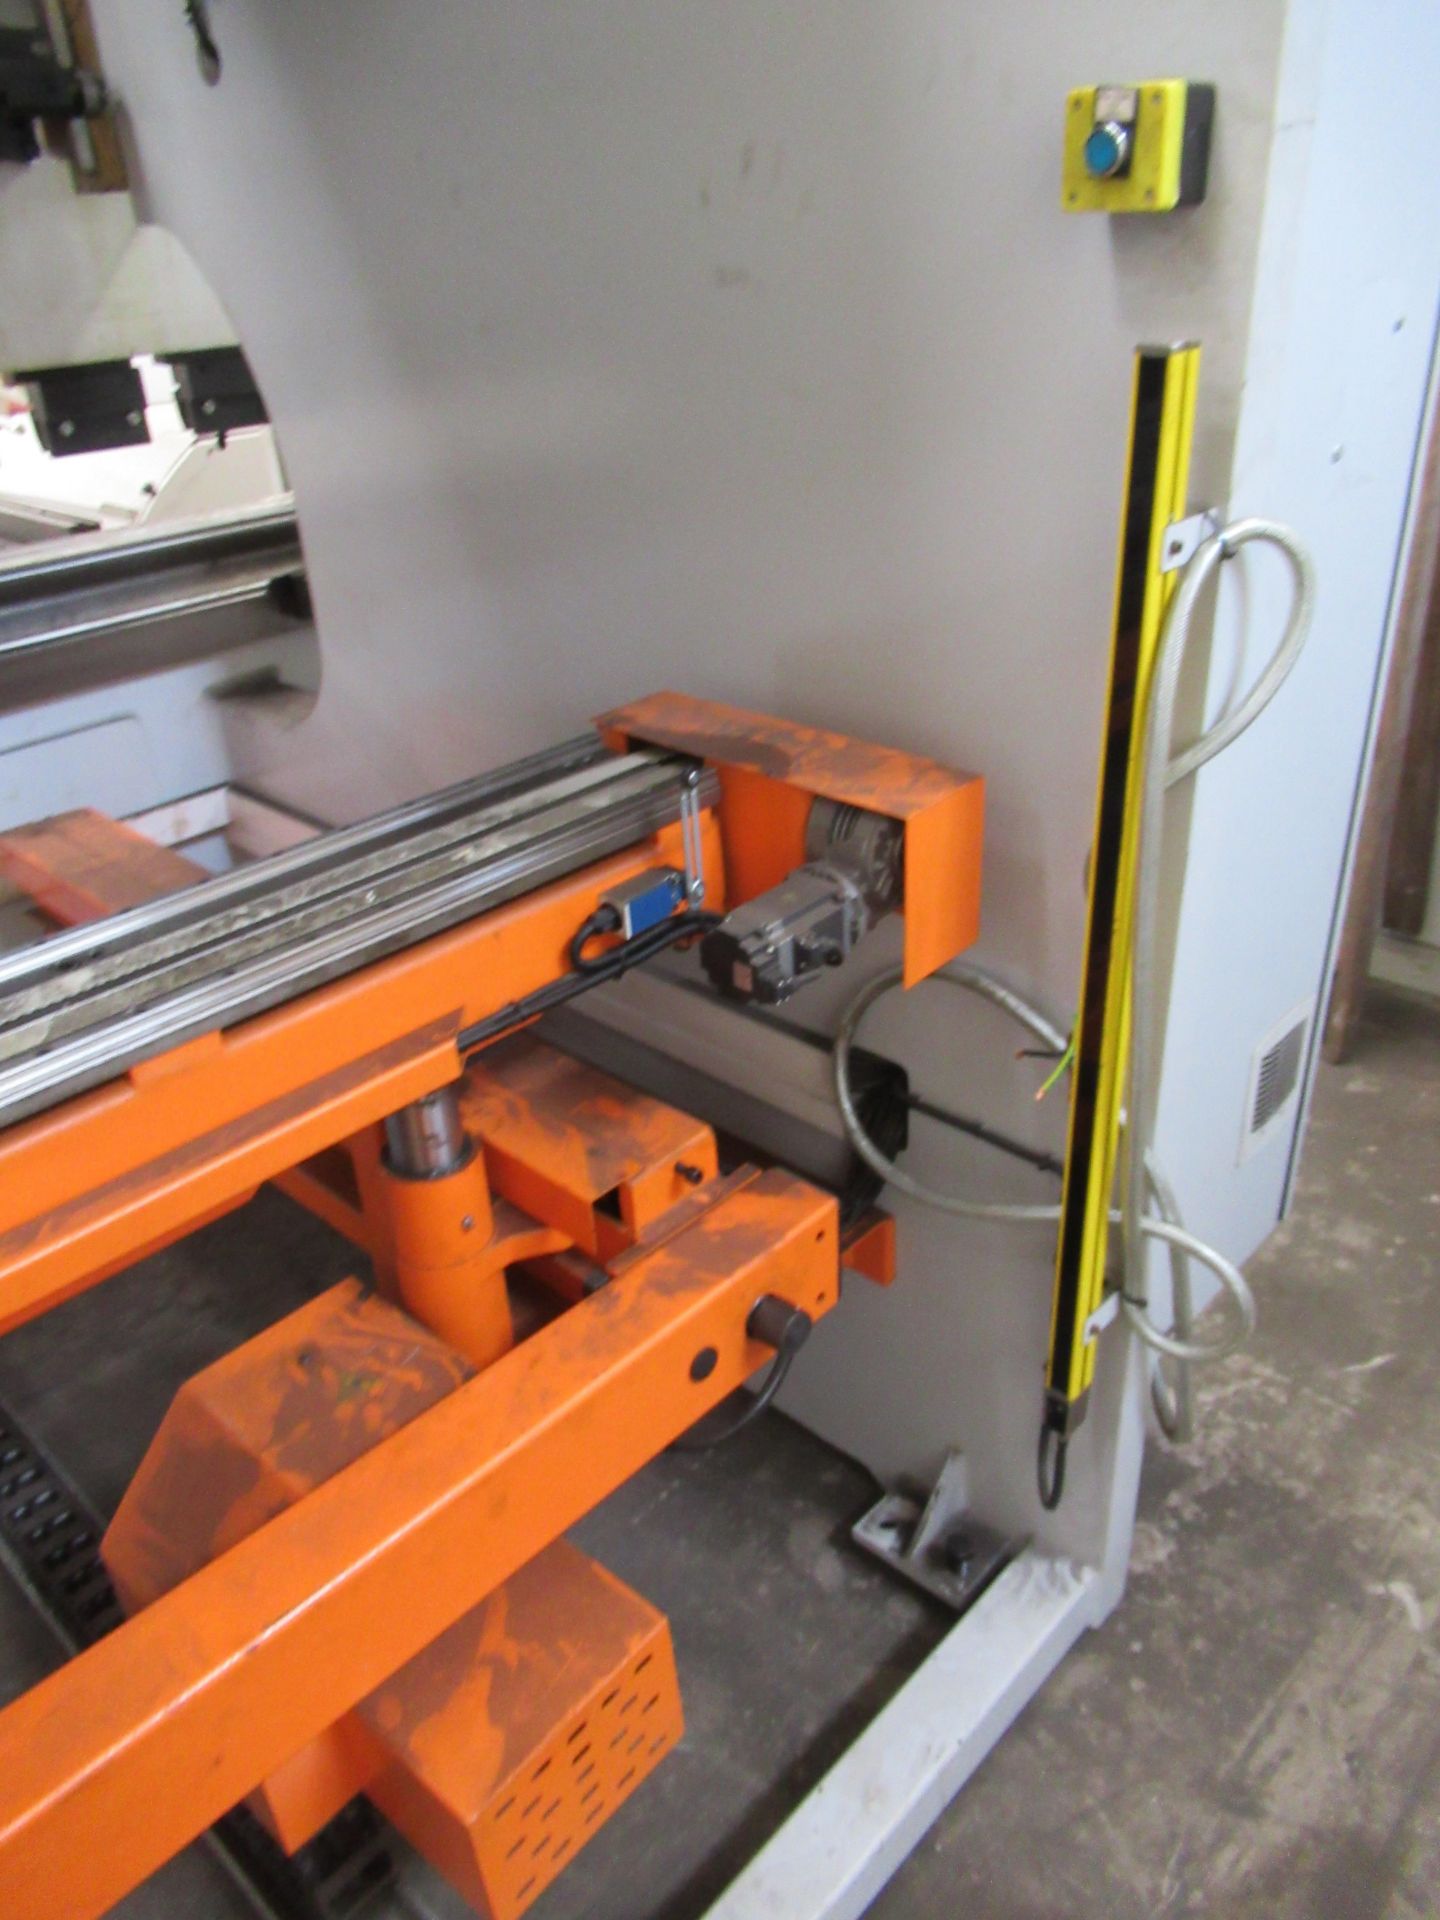 Ermaksan Speed-bend Pro 4100 x 220 CNC Hydraulic Press Brake and a selection of tooling for press br - Image 6 of 16